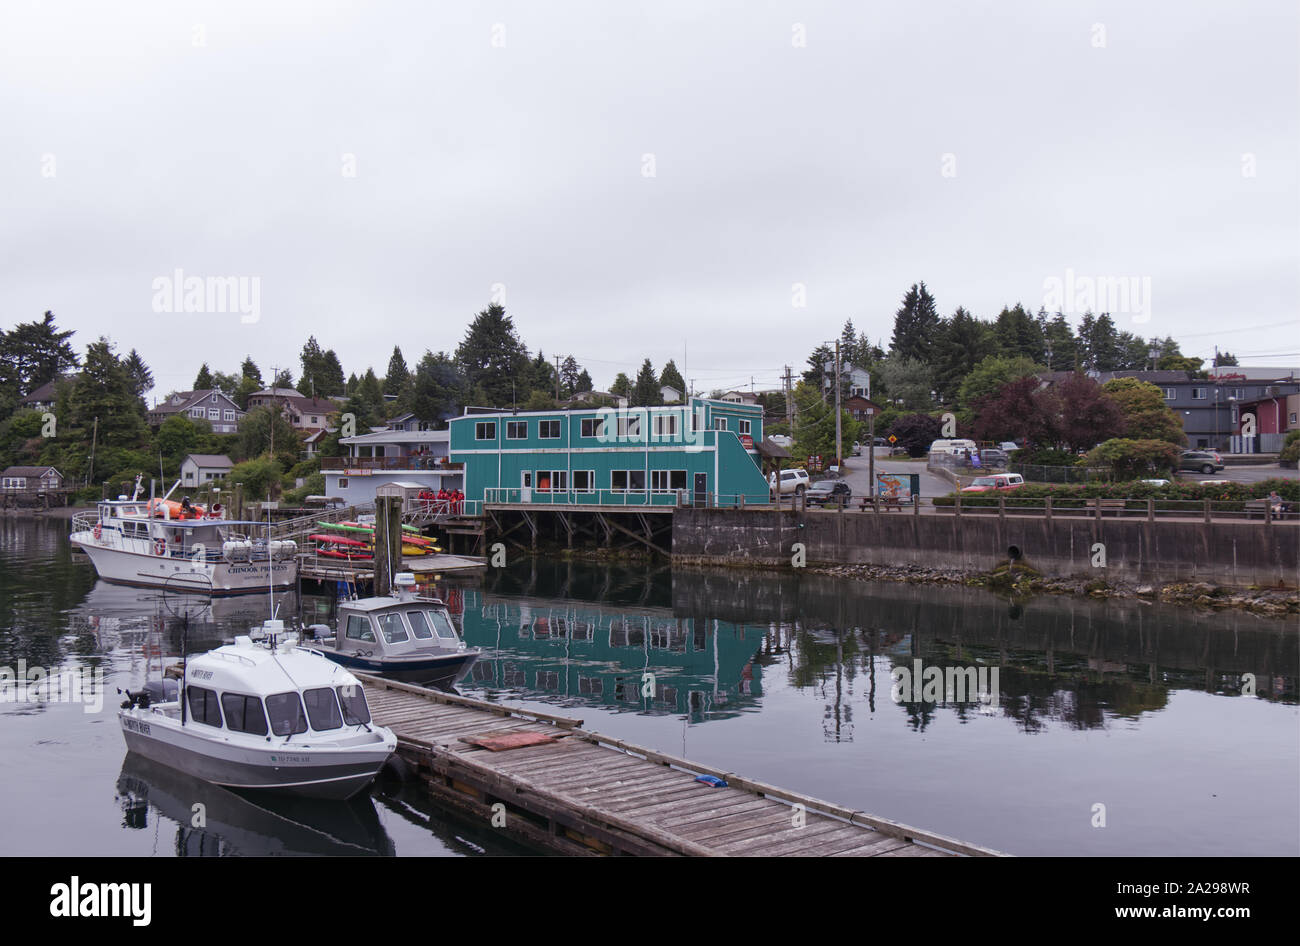 Ucluelet, Vancouver Island, Canada - June 17, 2019: Small Dock for fishing boats in the middle of the Village at early morning Stock Photo